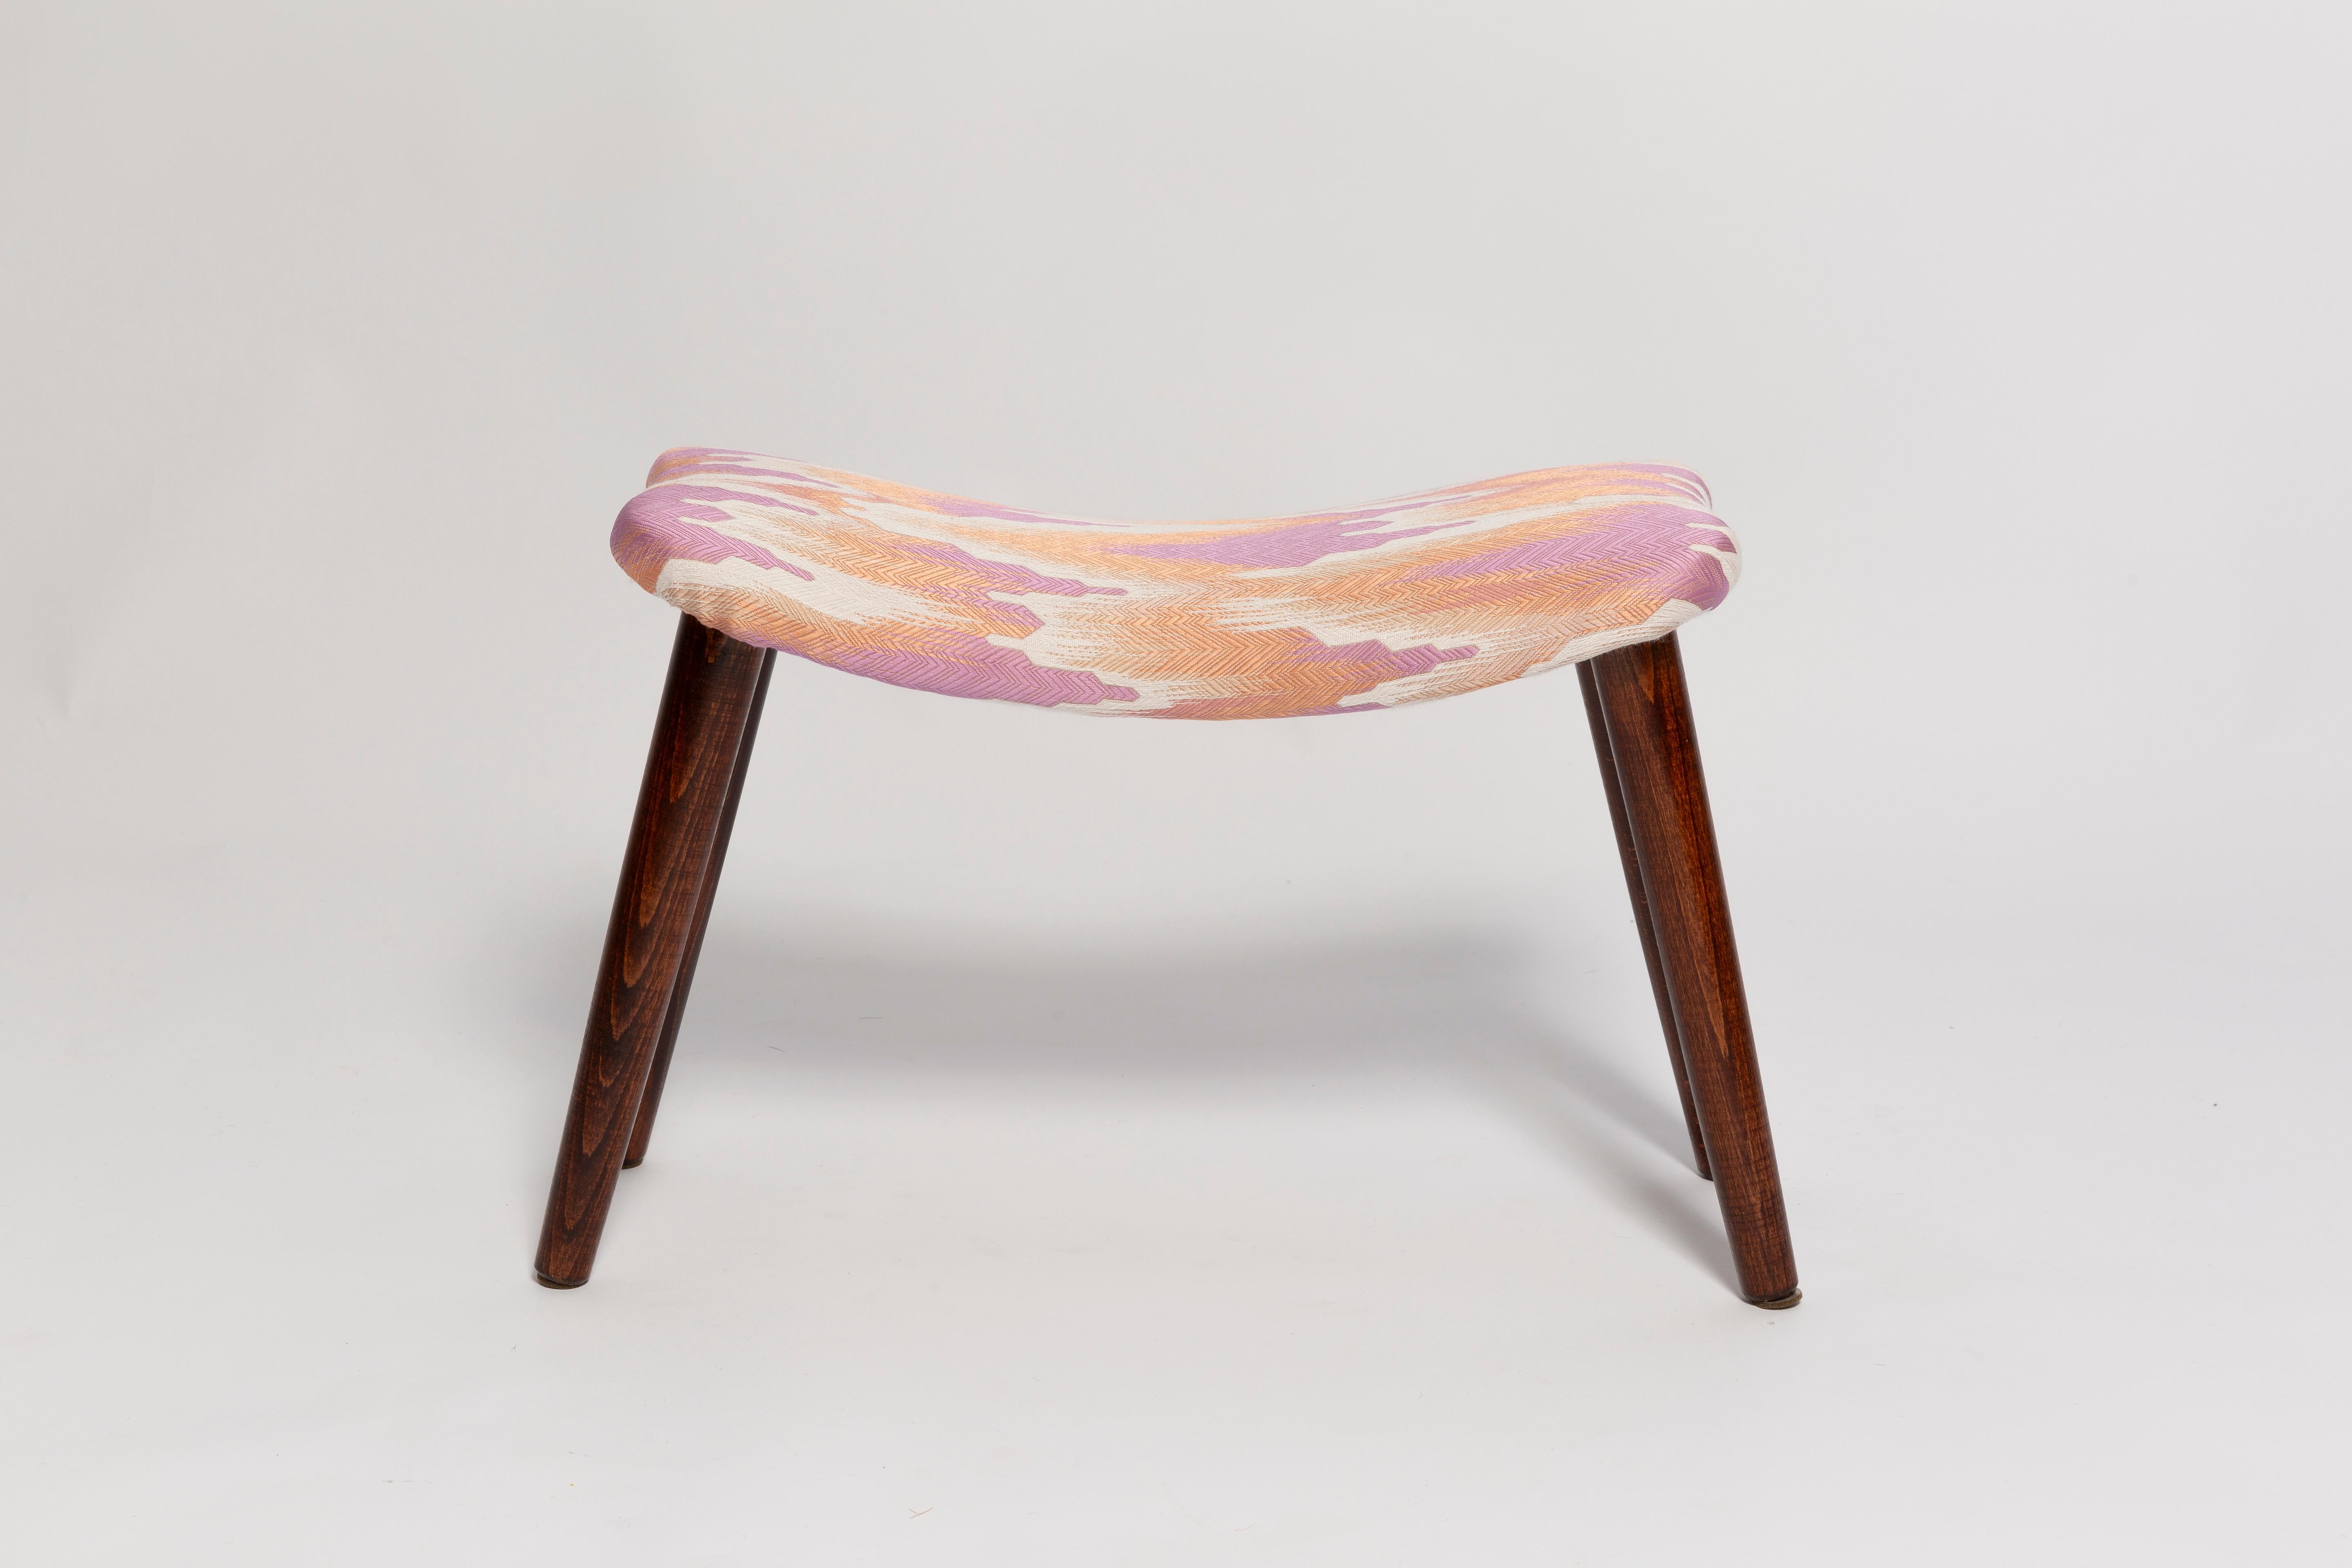 Hand-Crafted Mini Butterfly Stool, Pink Fandango Jacquard, Dark Wood, Europe 1960s For Sale